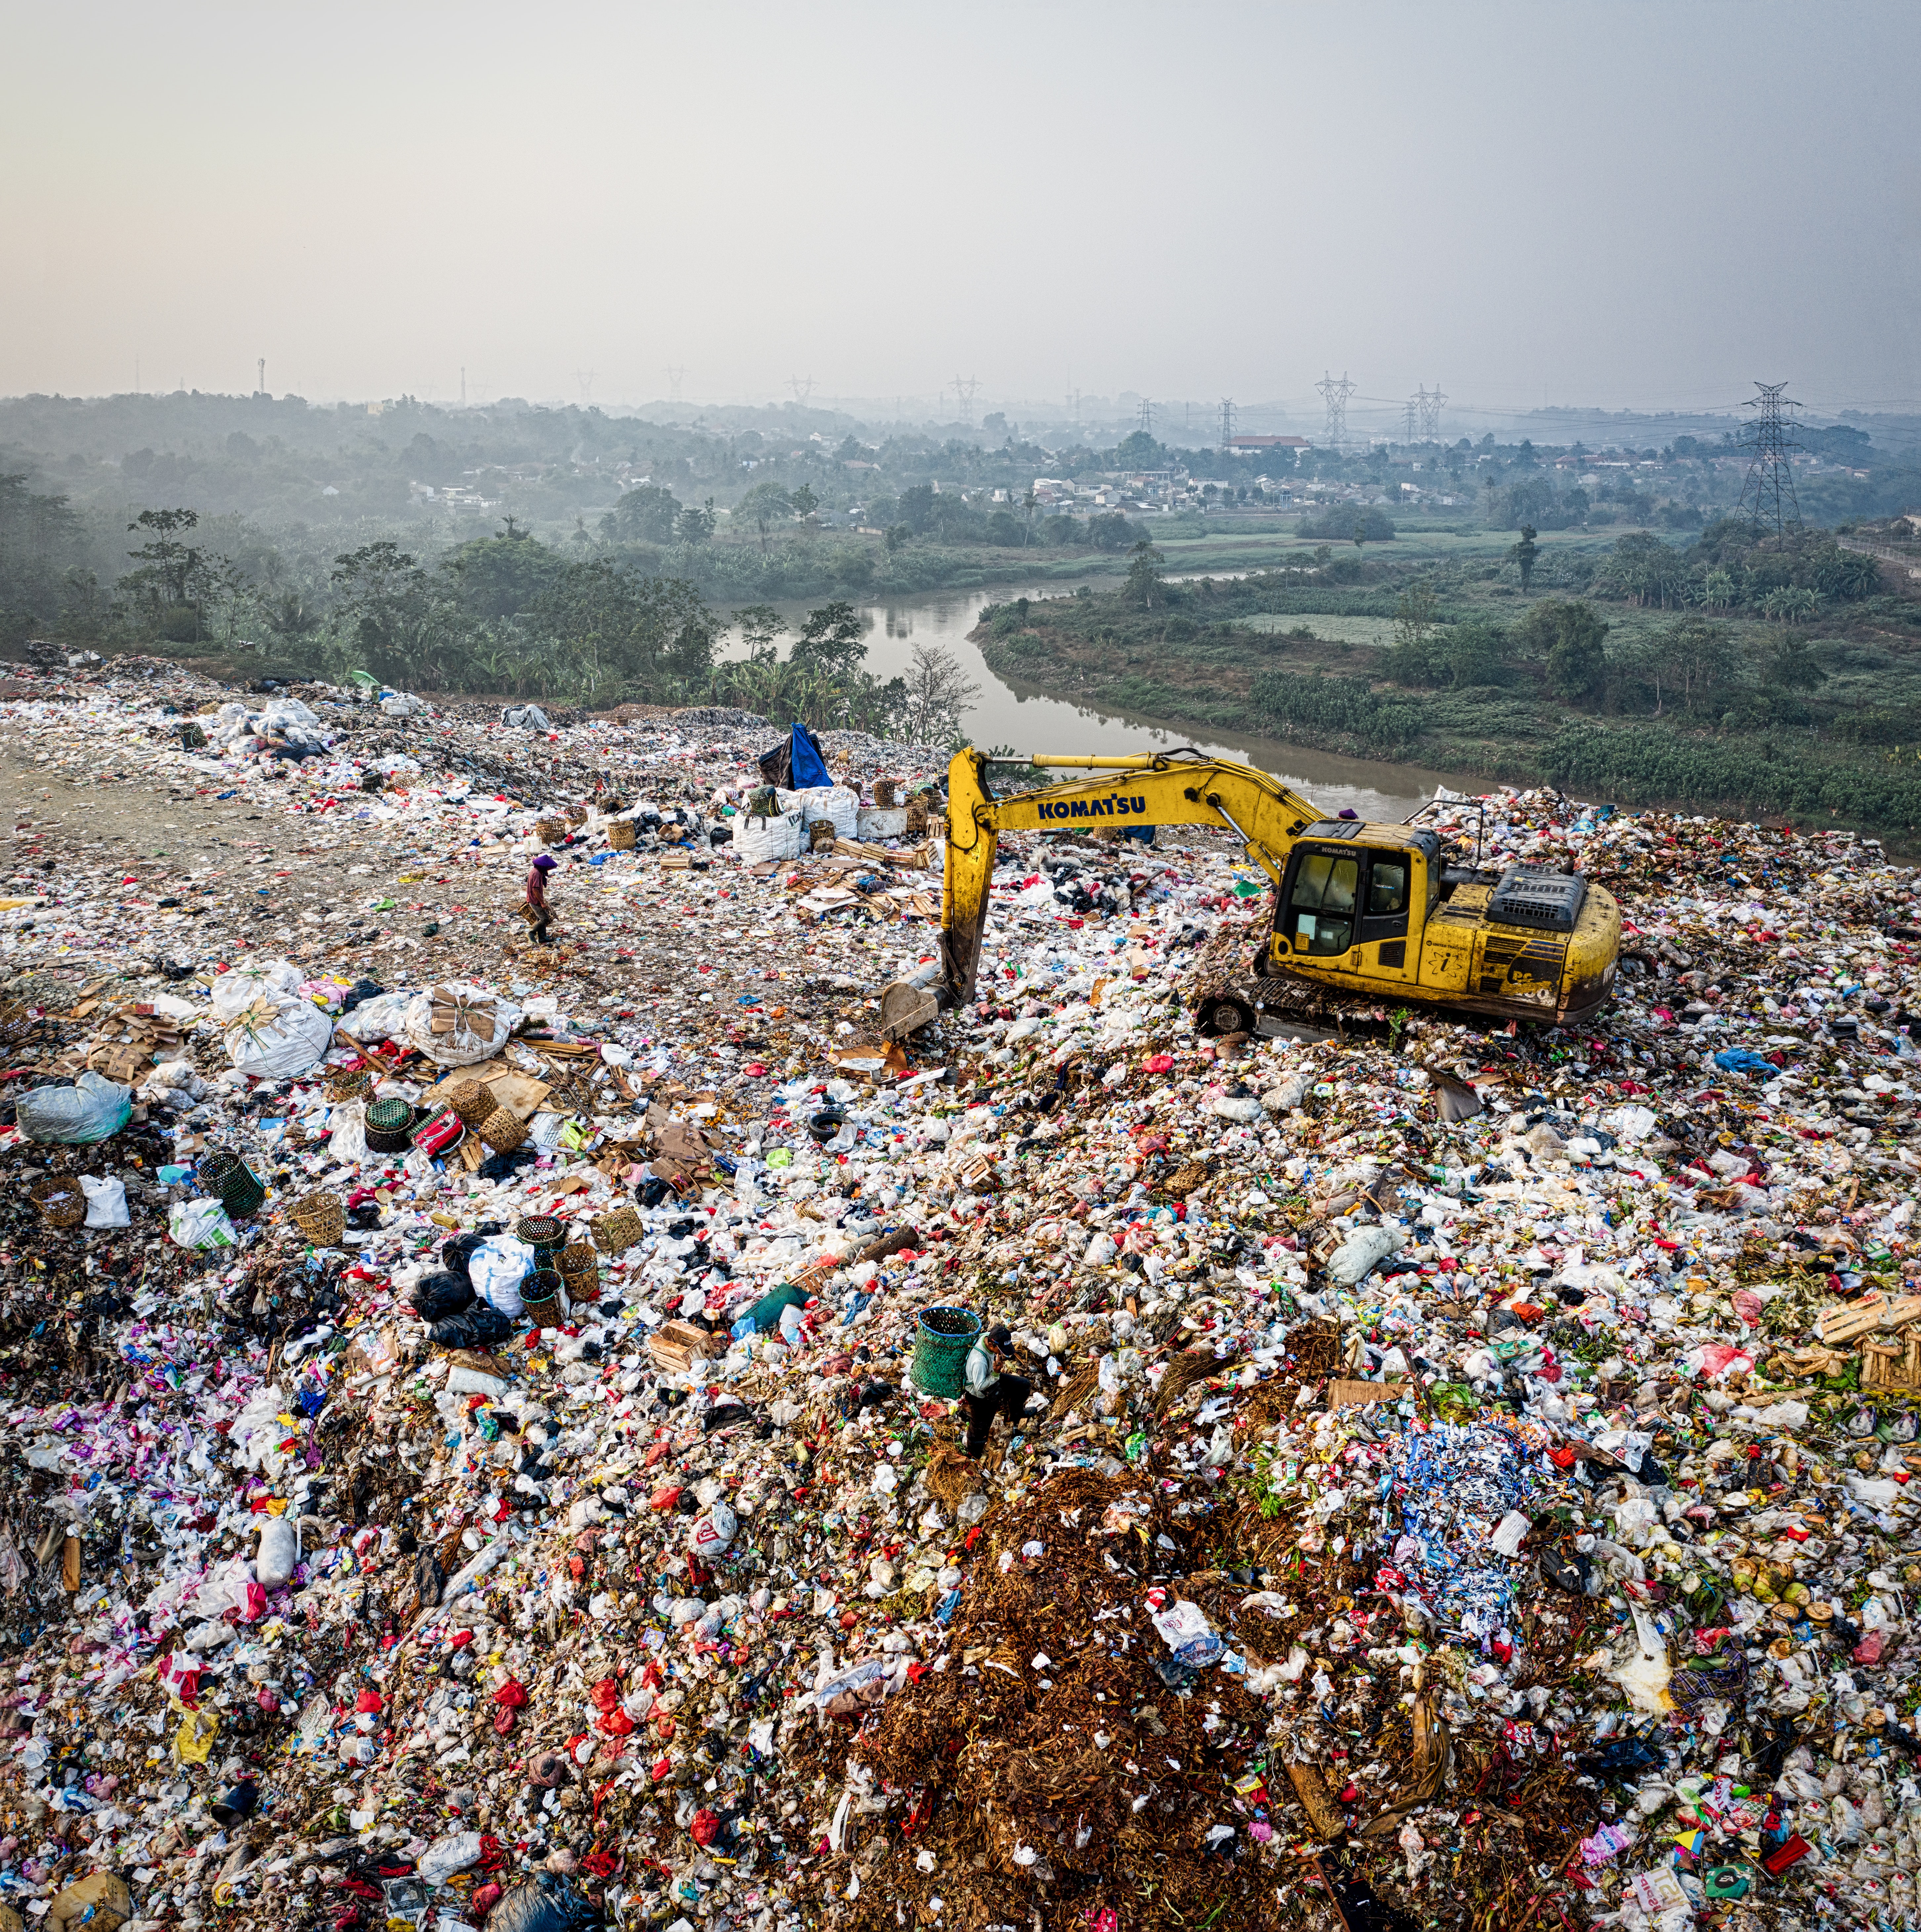 Waste in a landfill with a yellow excavator in the background